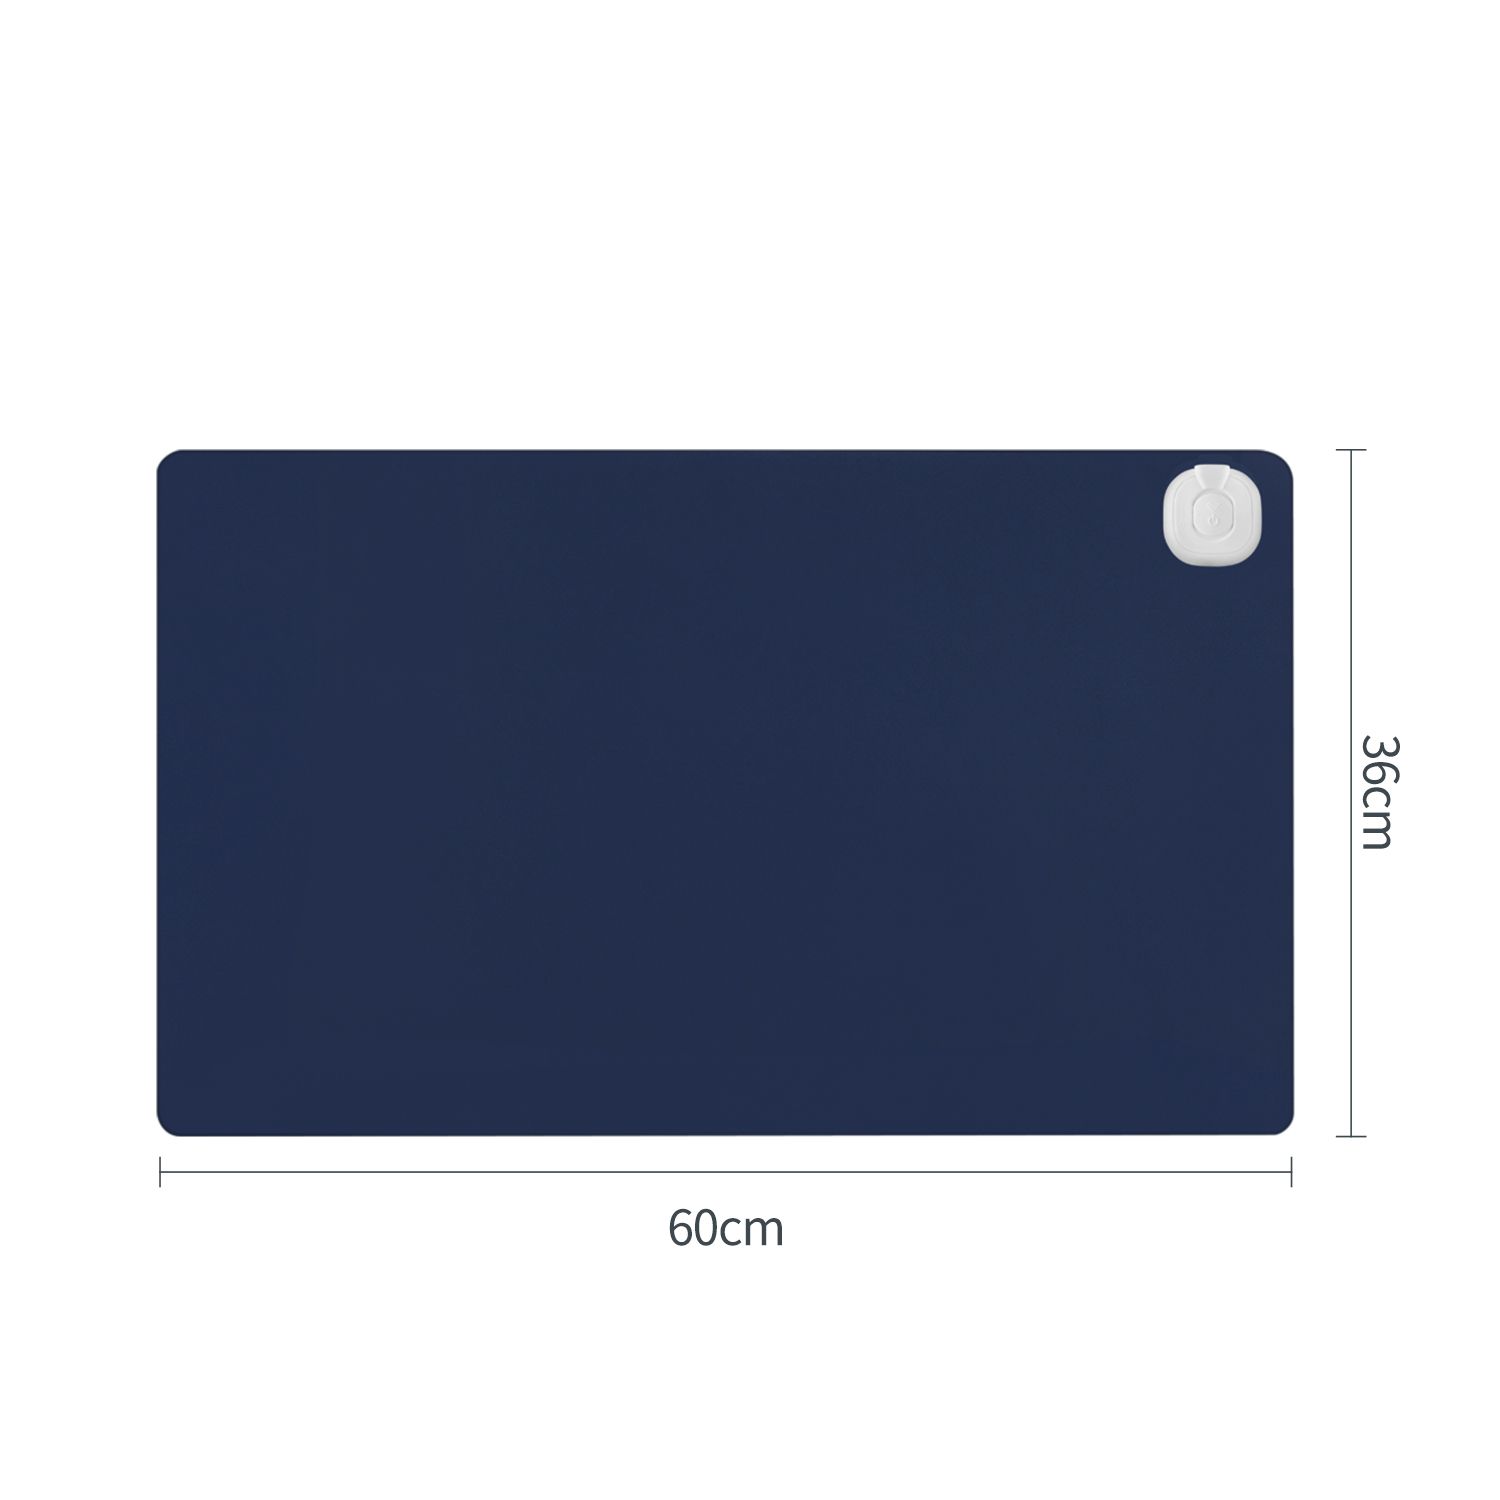 BUBM-JRZD-B-Heating-Pad-Desktop-Mouse-Pad-Warm-Table-Mat-Electric-Heating-Plate-Writing-Mat-for-Offi-1620477